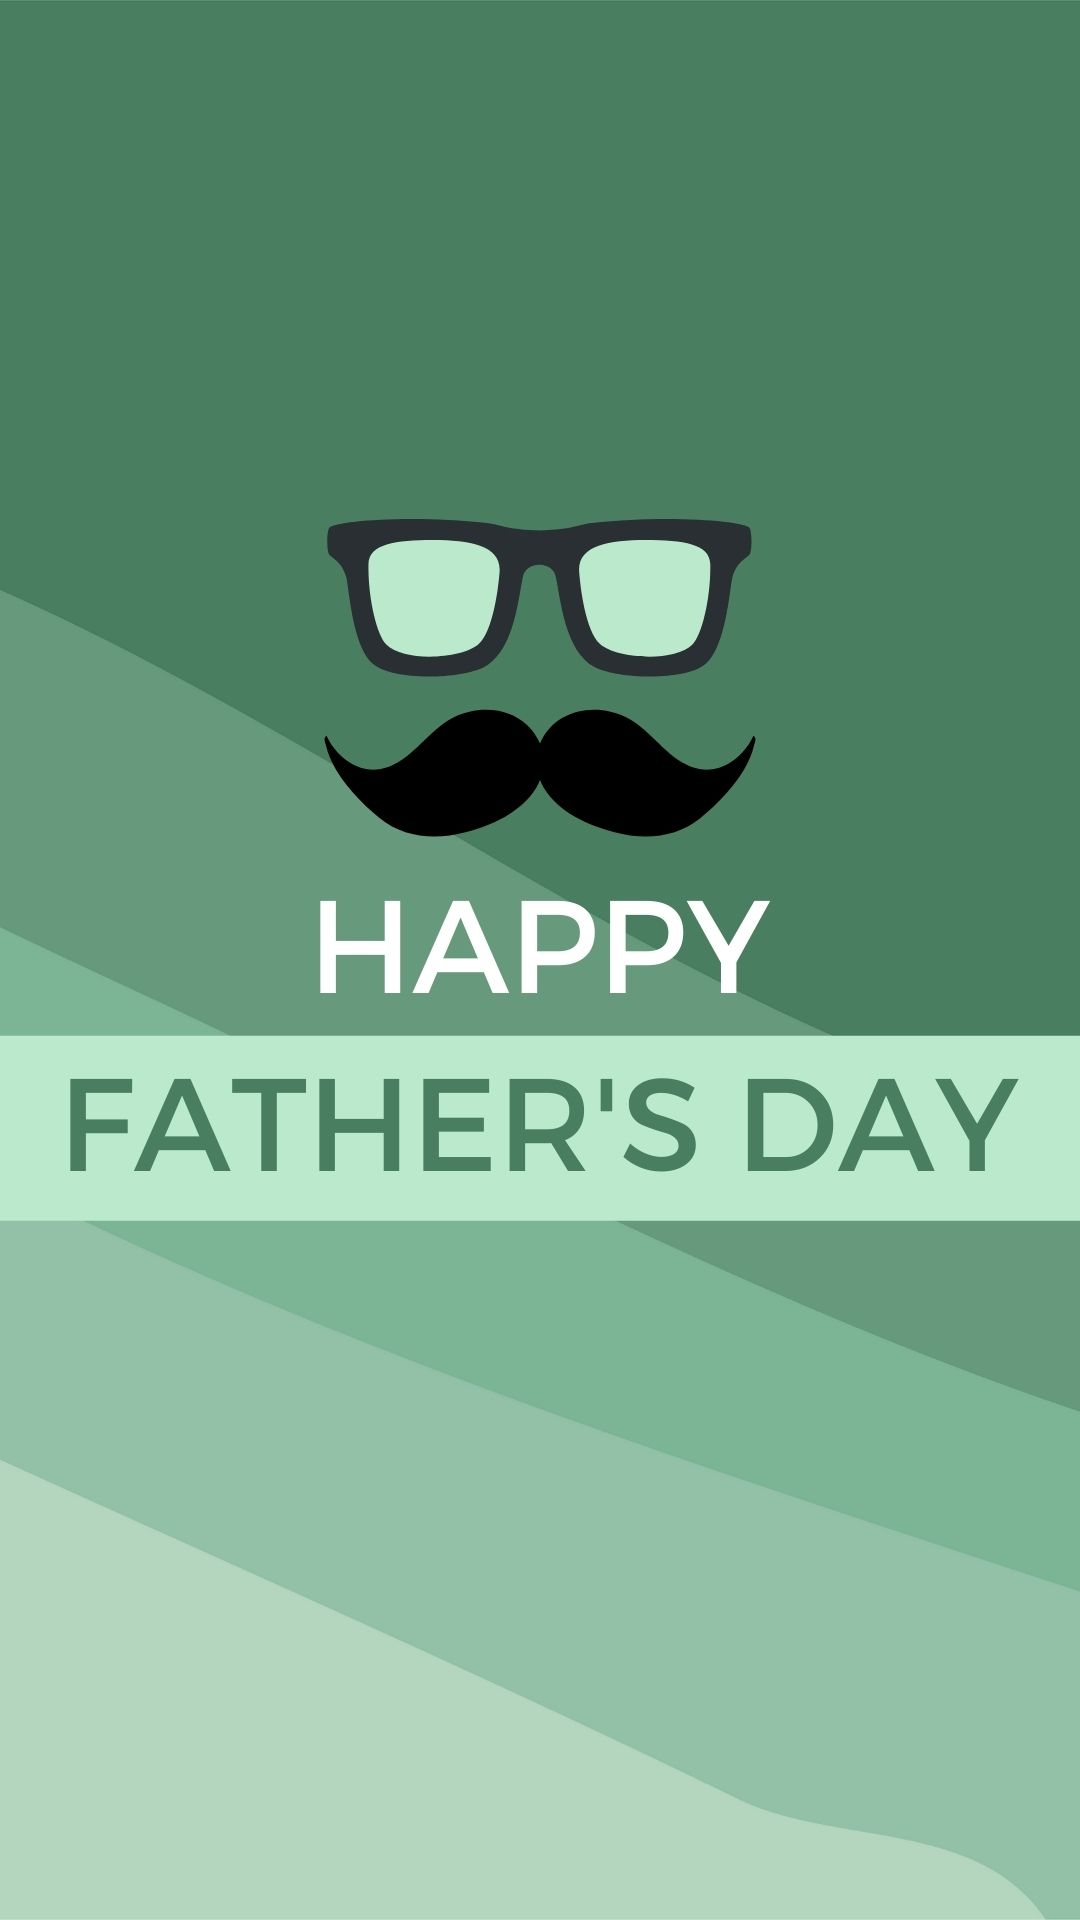 best happy father's day wishes images for instagram story (25)